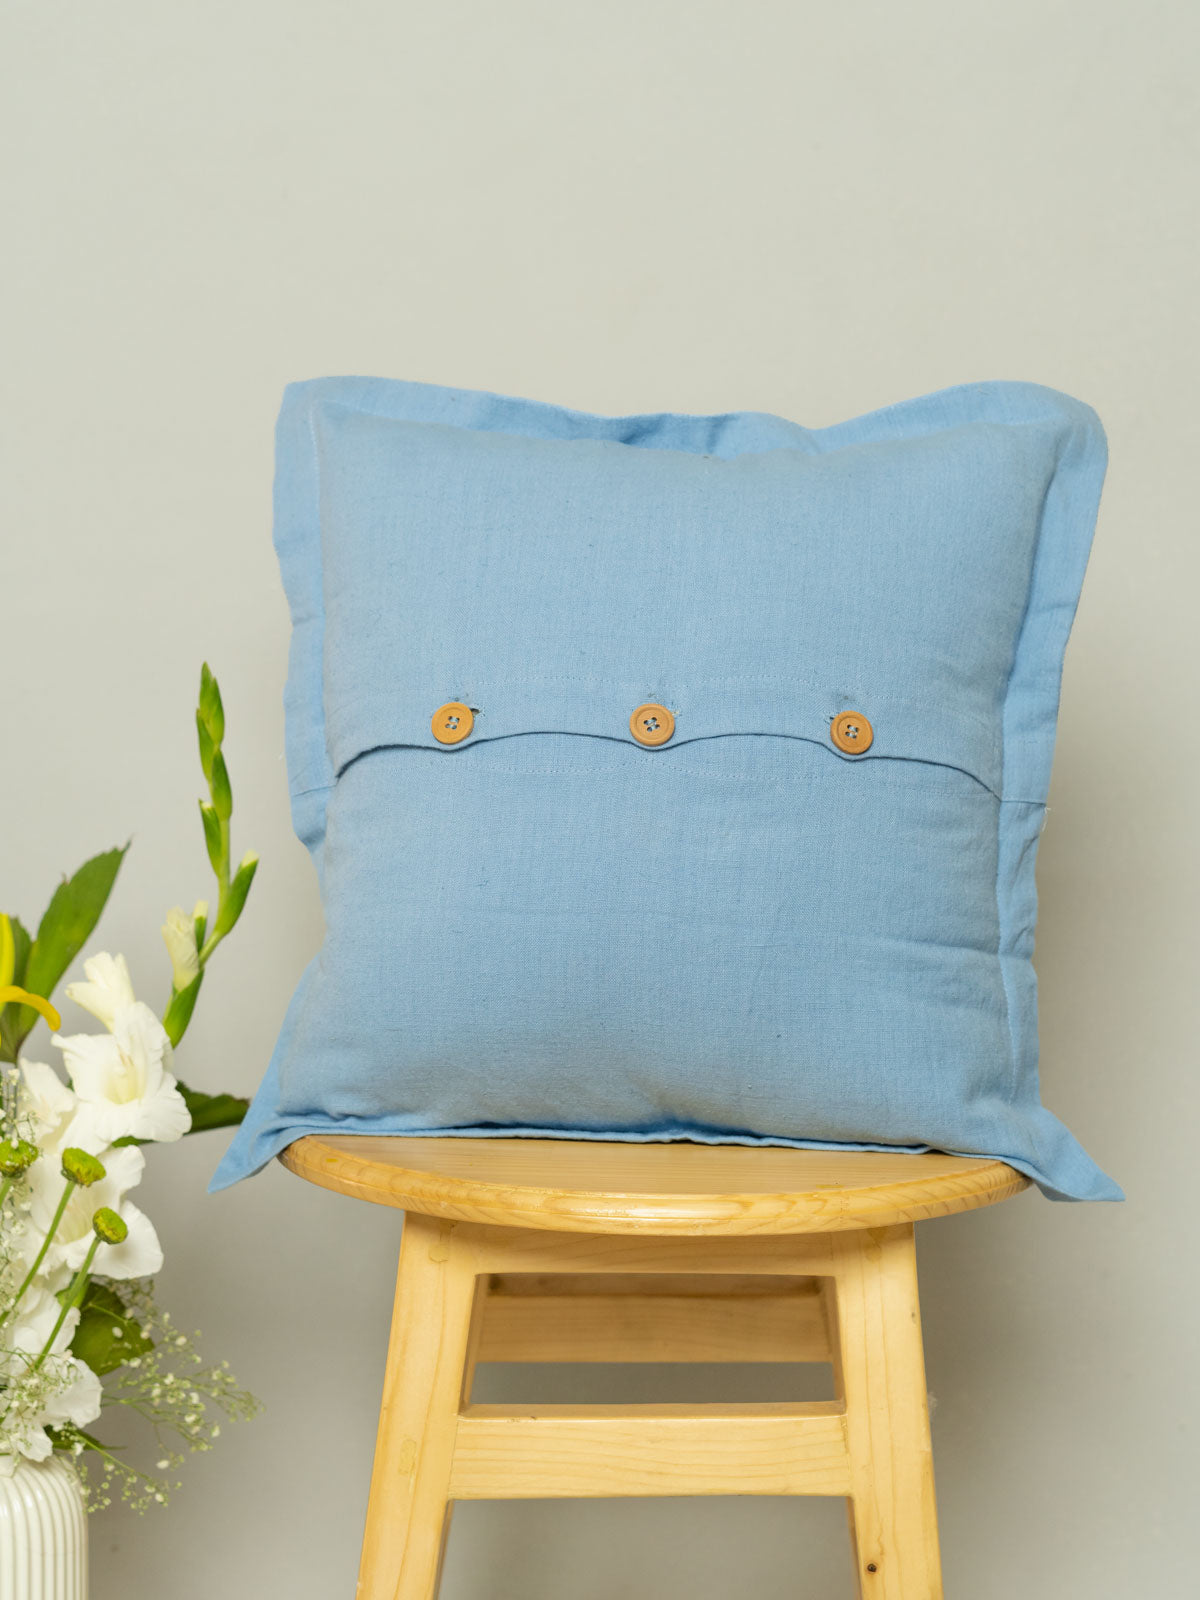 Humming Birds, French Farmhouse, Powder Blue Linen , Pampas Grass Set Of 4 Combo Cotton Cushion Cover - Blue